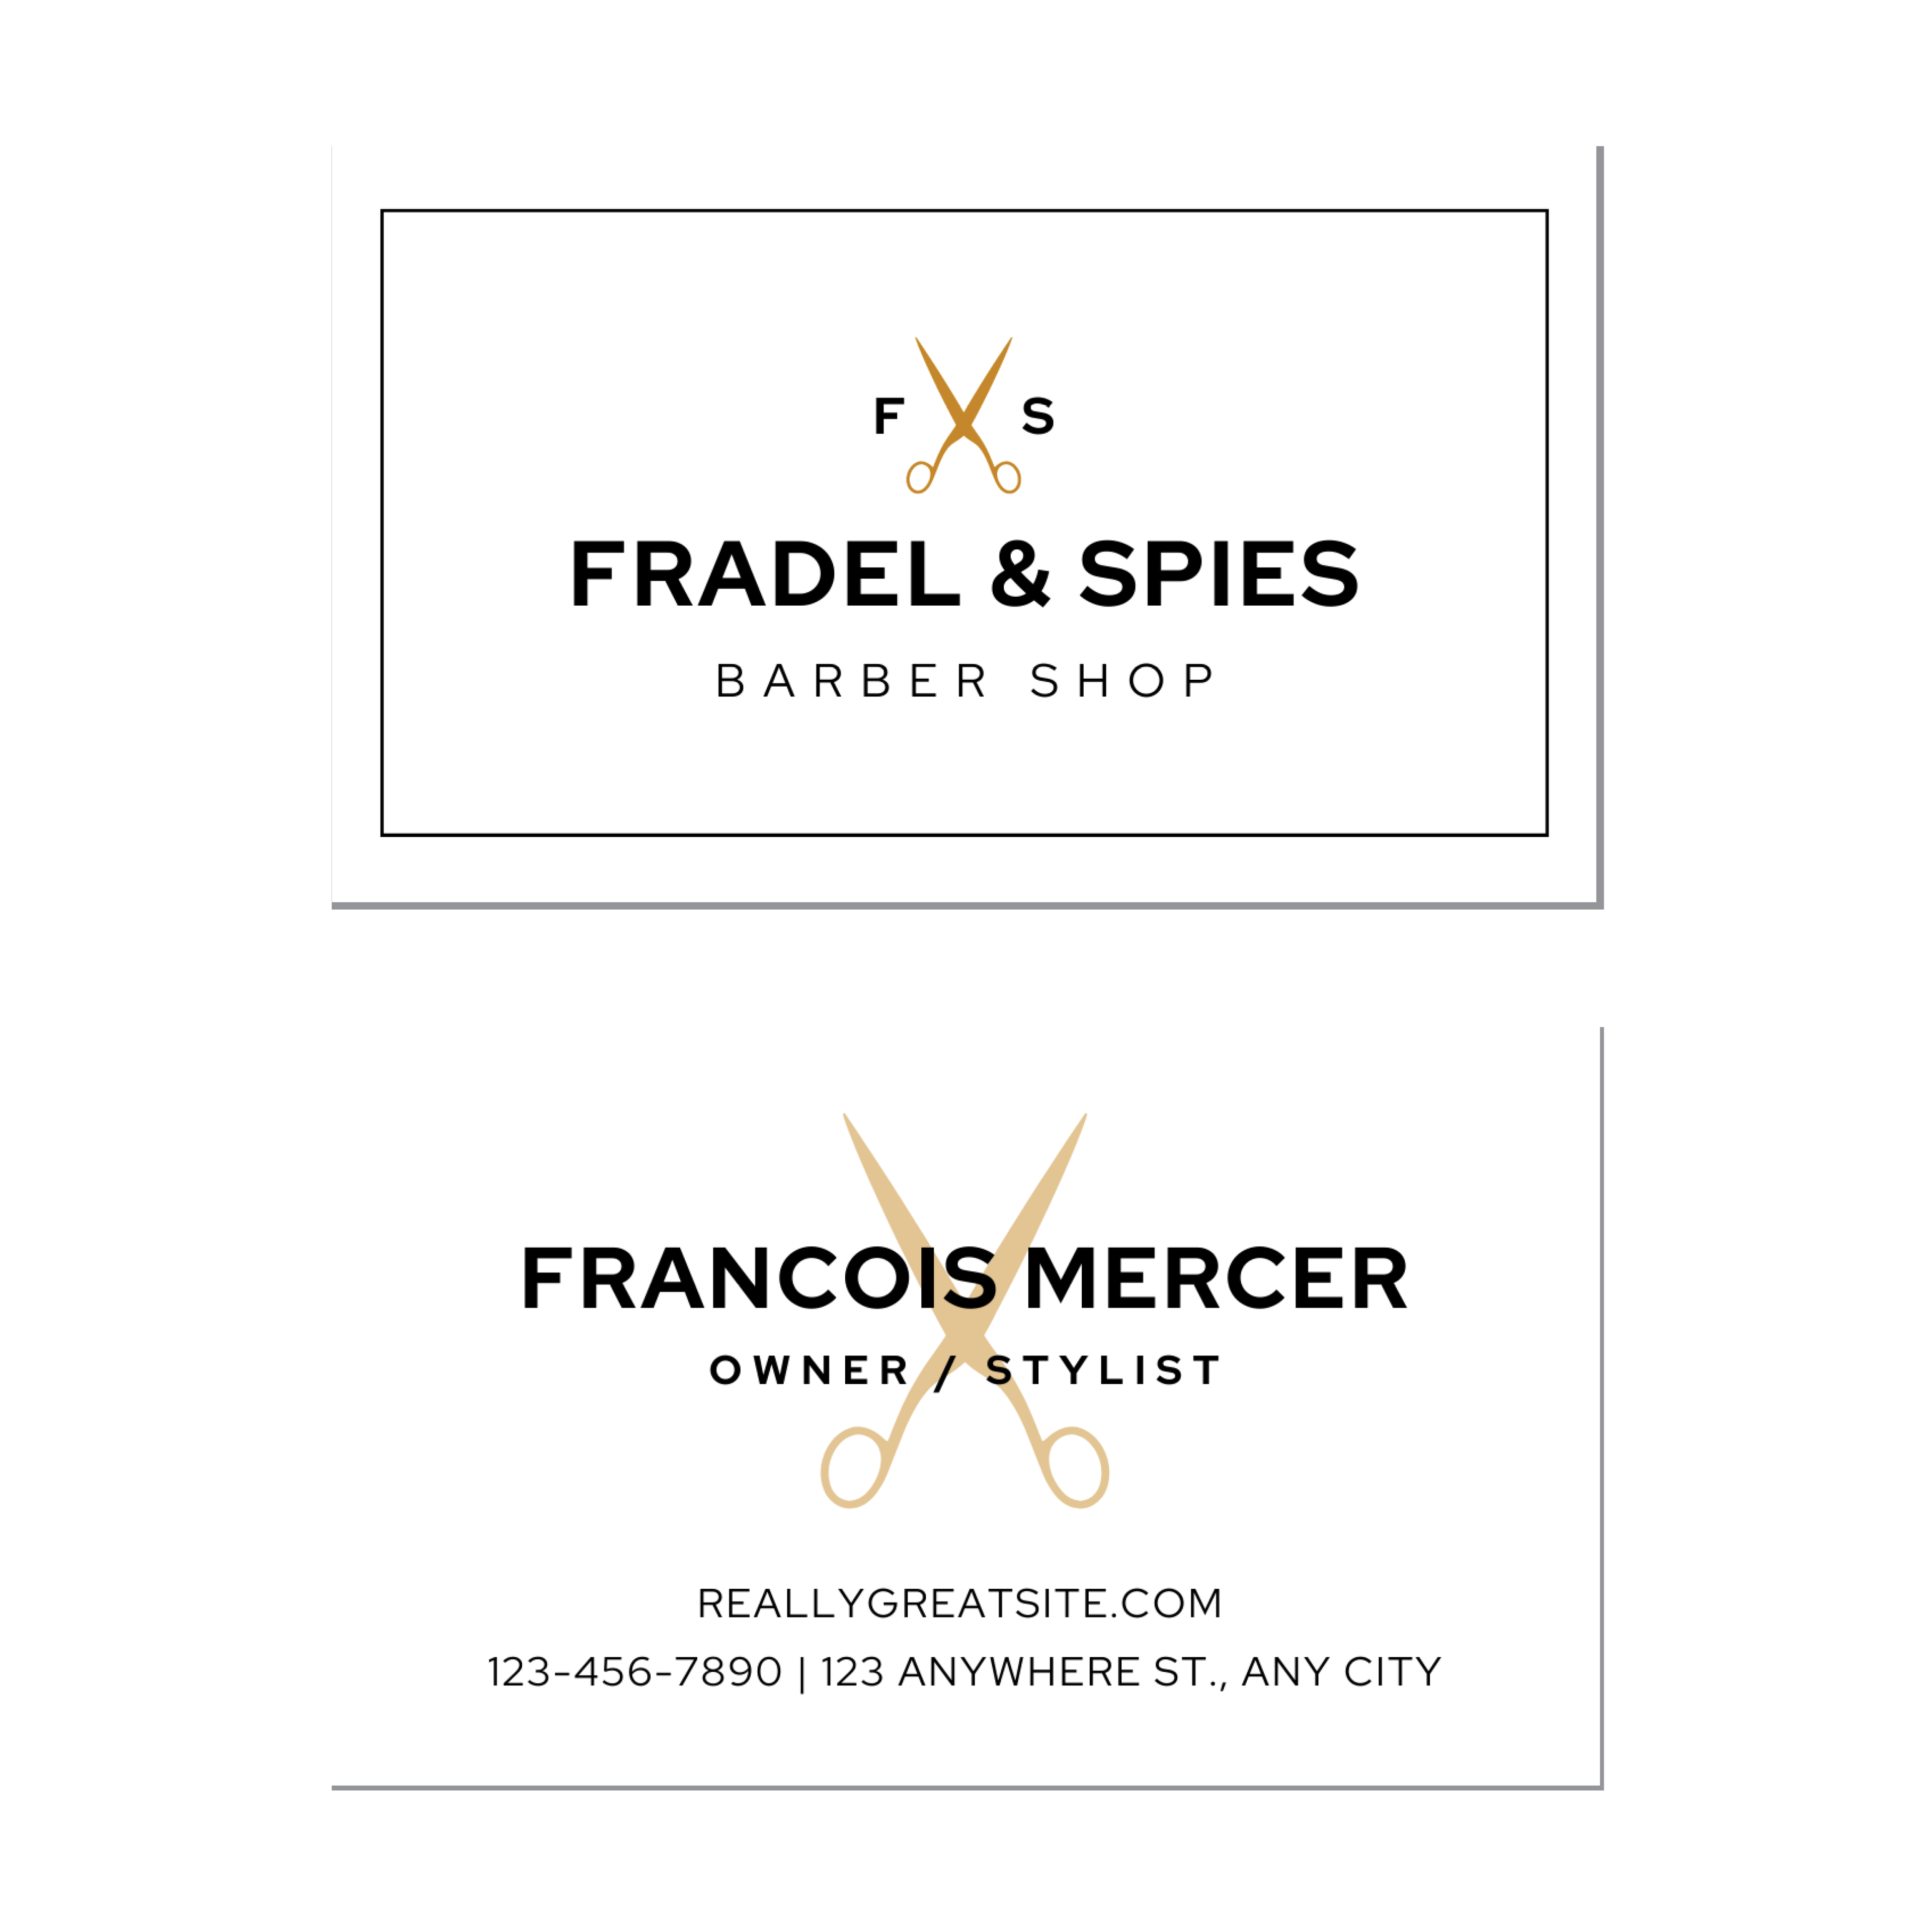 White Gold Barber - Business Card Template - Two Side